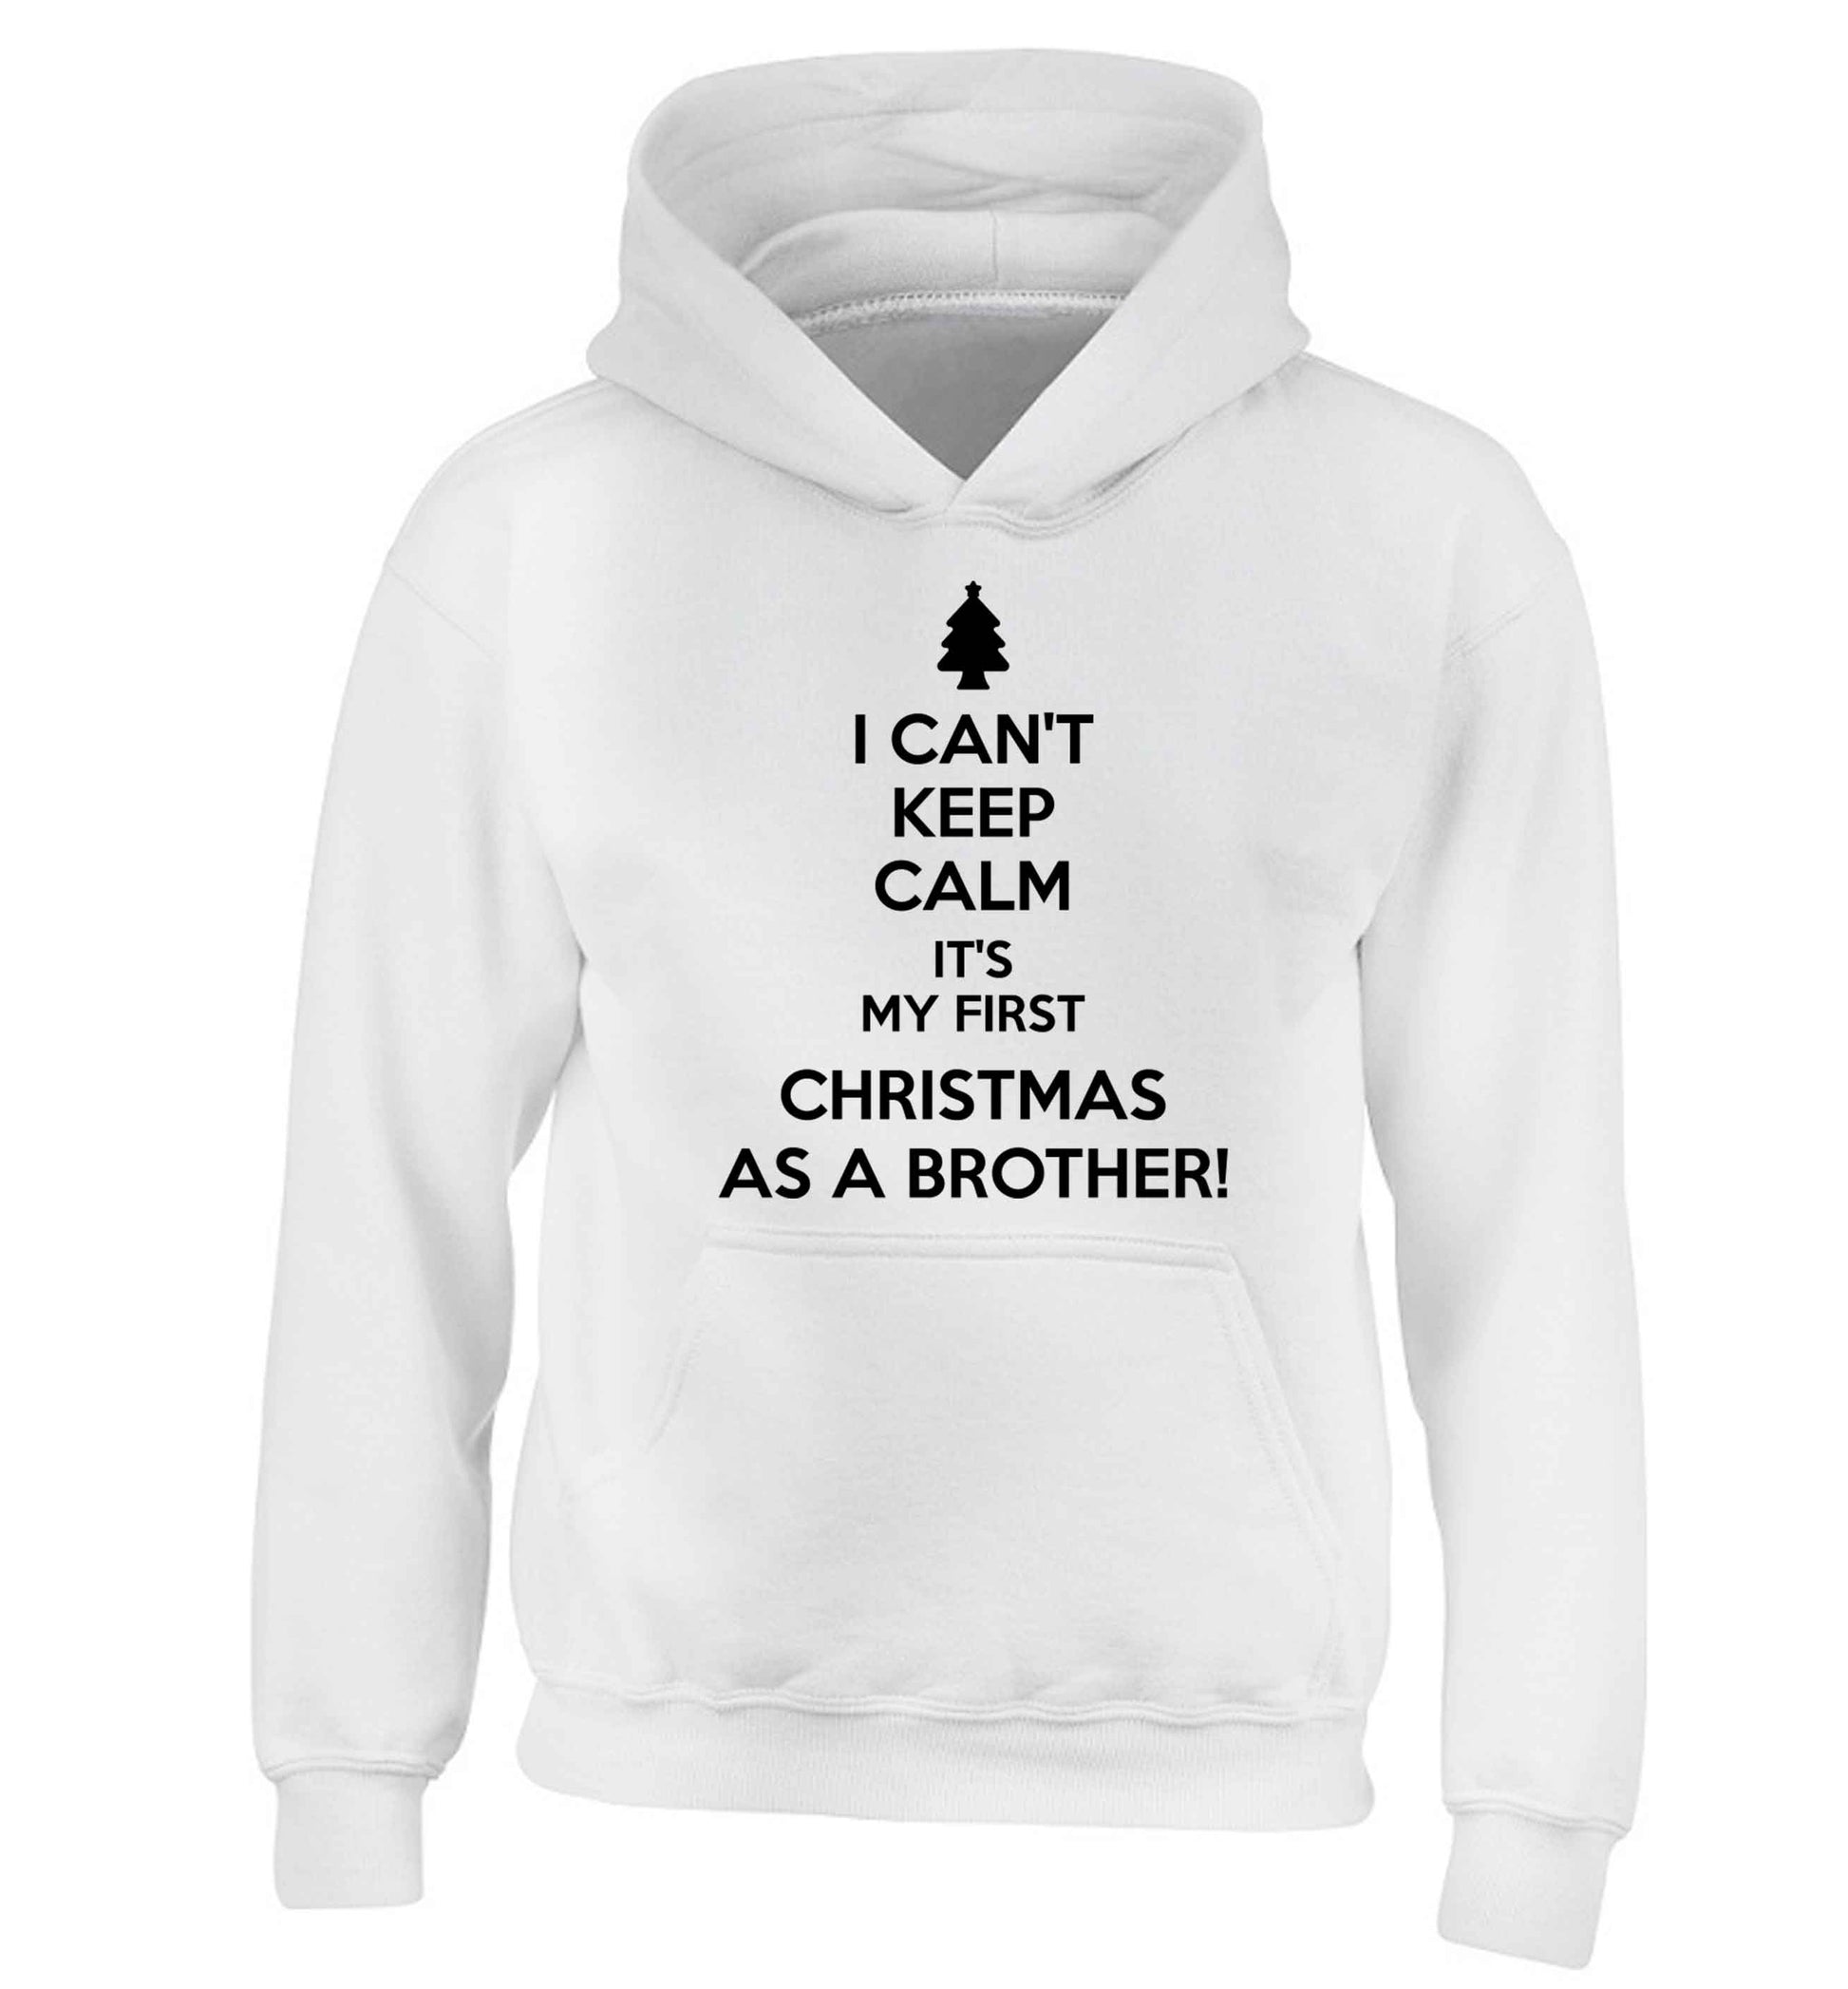 I can't keep calm it's my first Christmas as a brother! children's white hoodie 12-13 Years